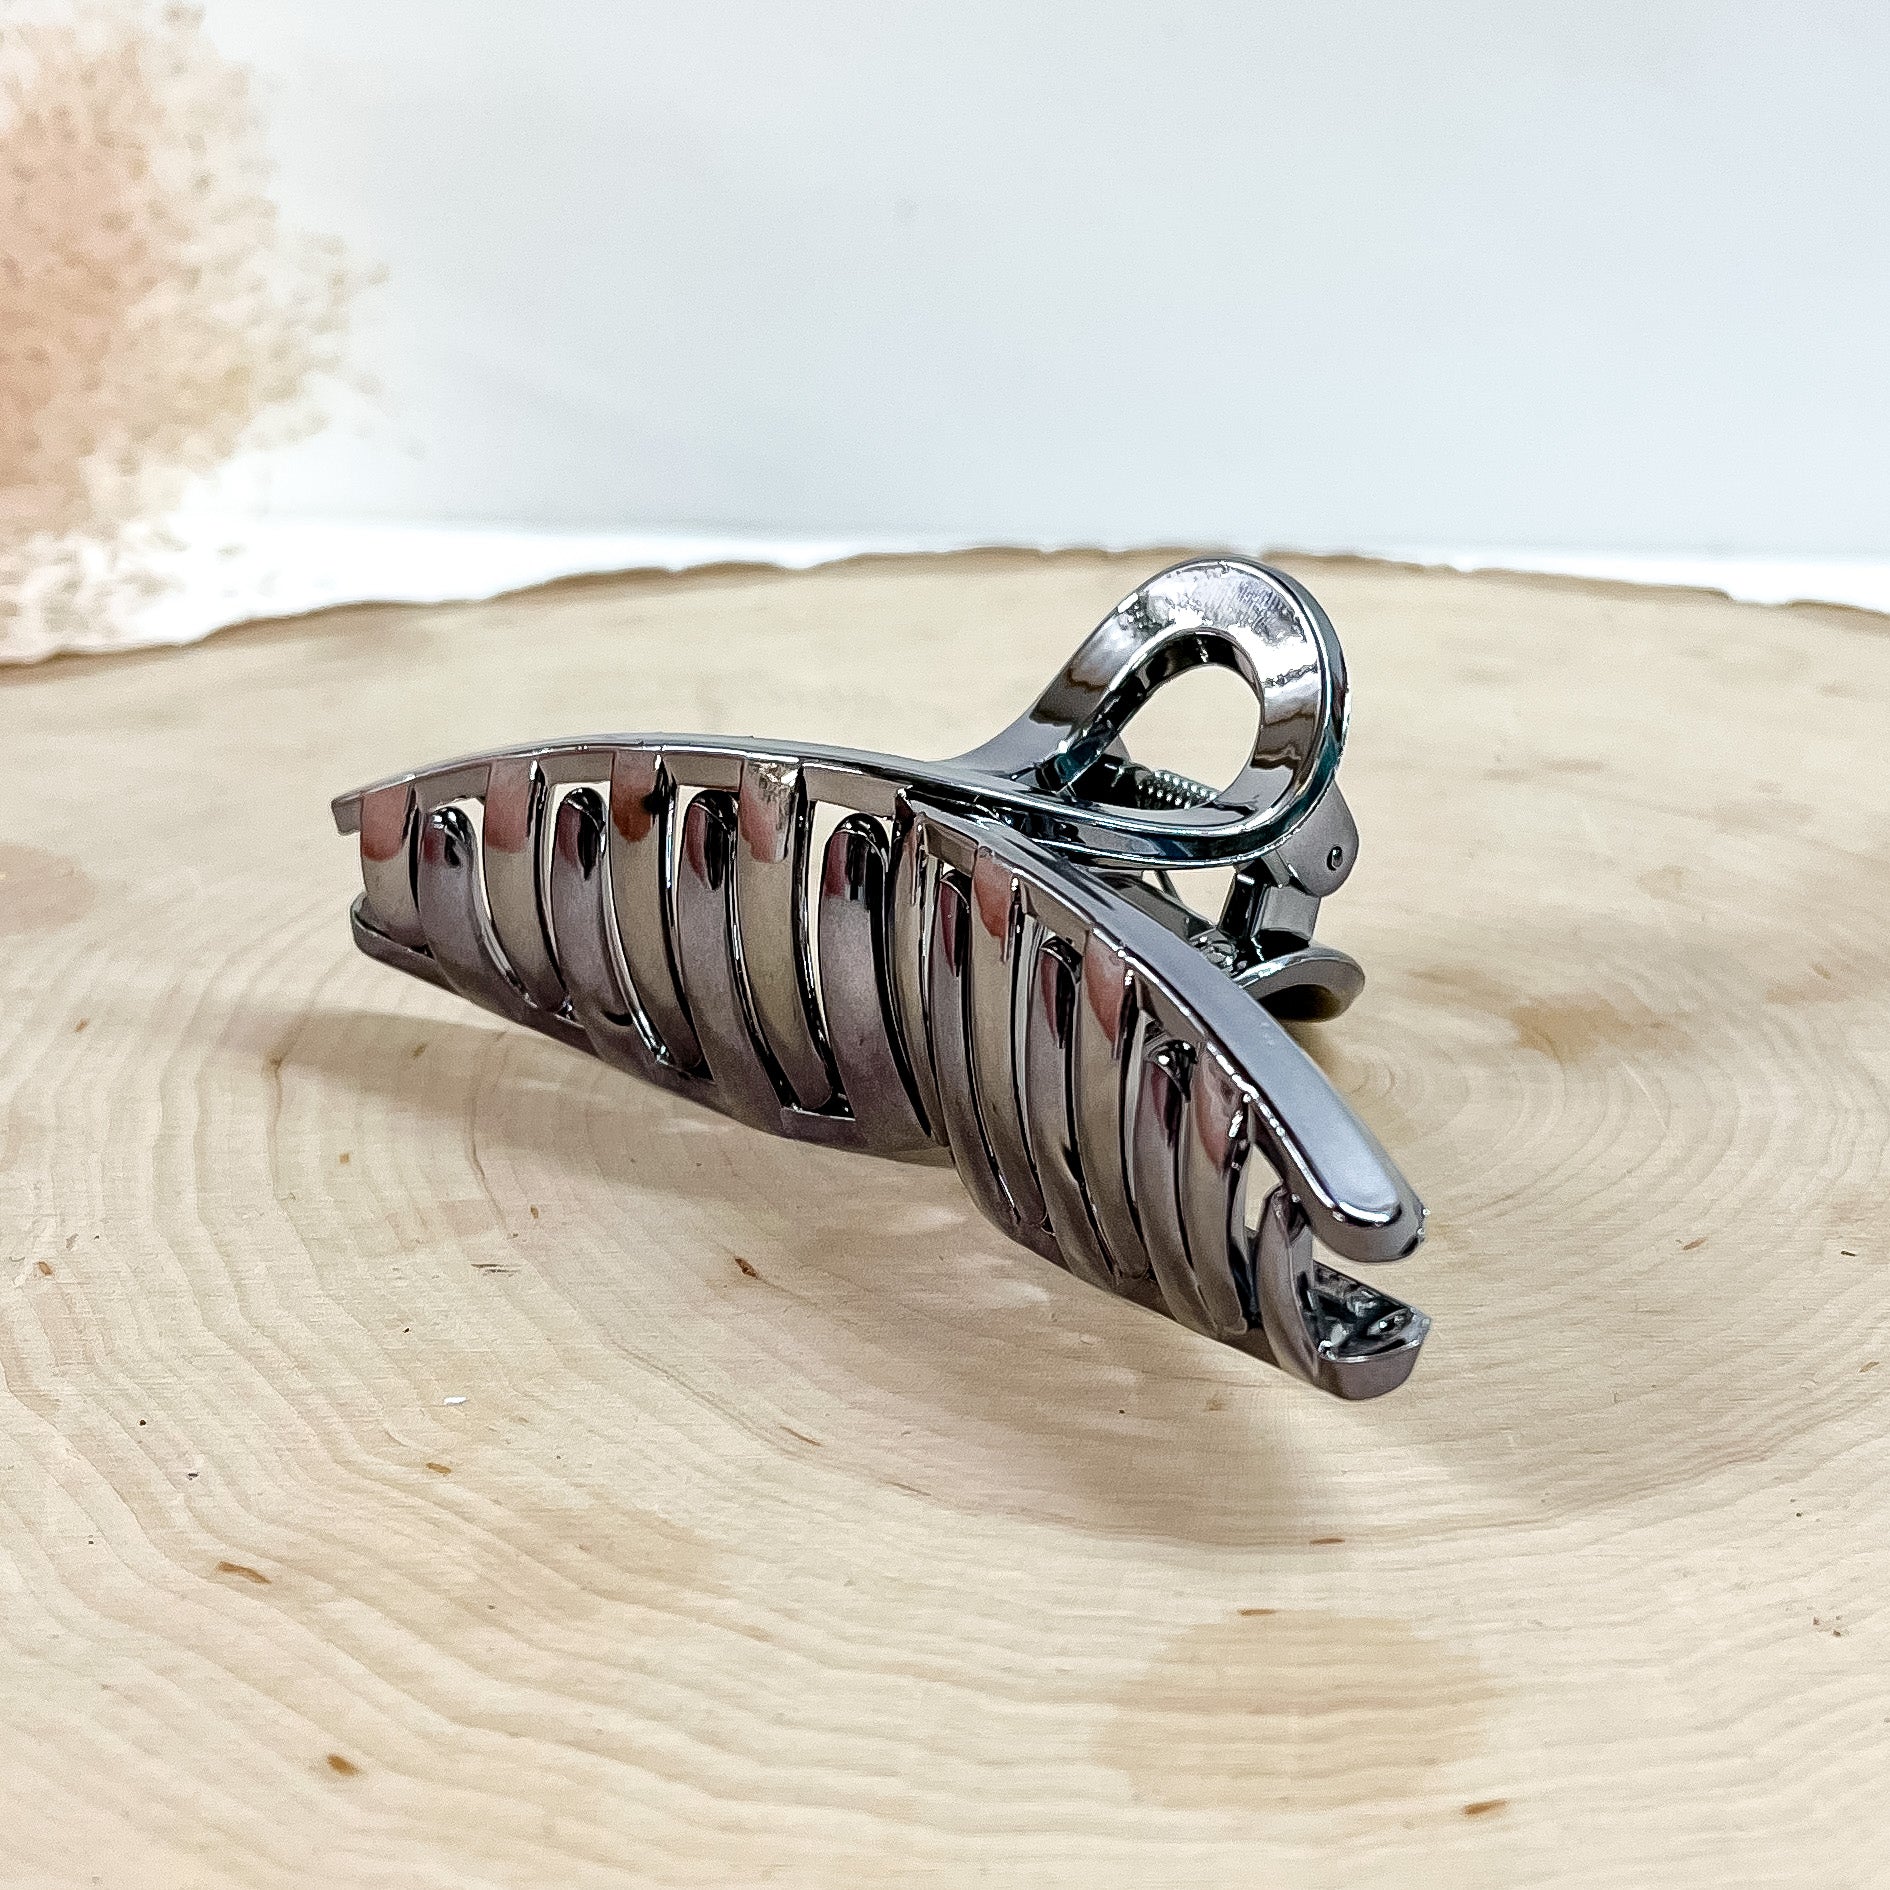 This is a long loop metallic hair clip in gunmetal,  this clip is taken on a  slab of wood and in white background with a plant in the side as decor.